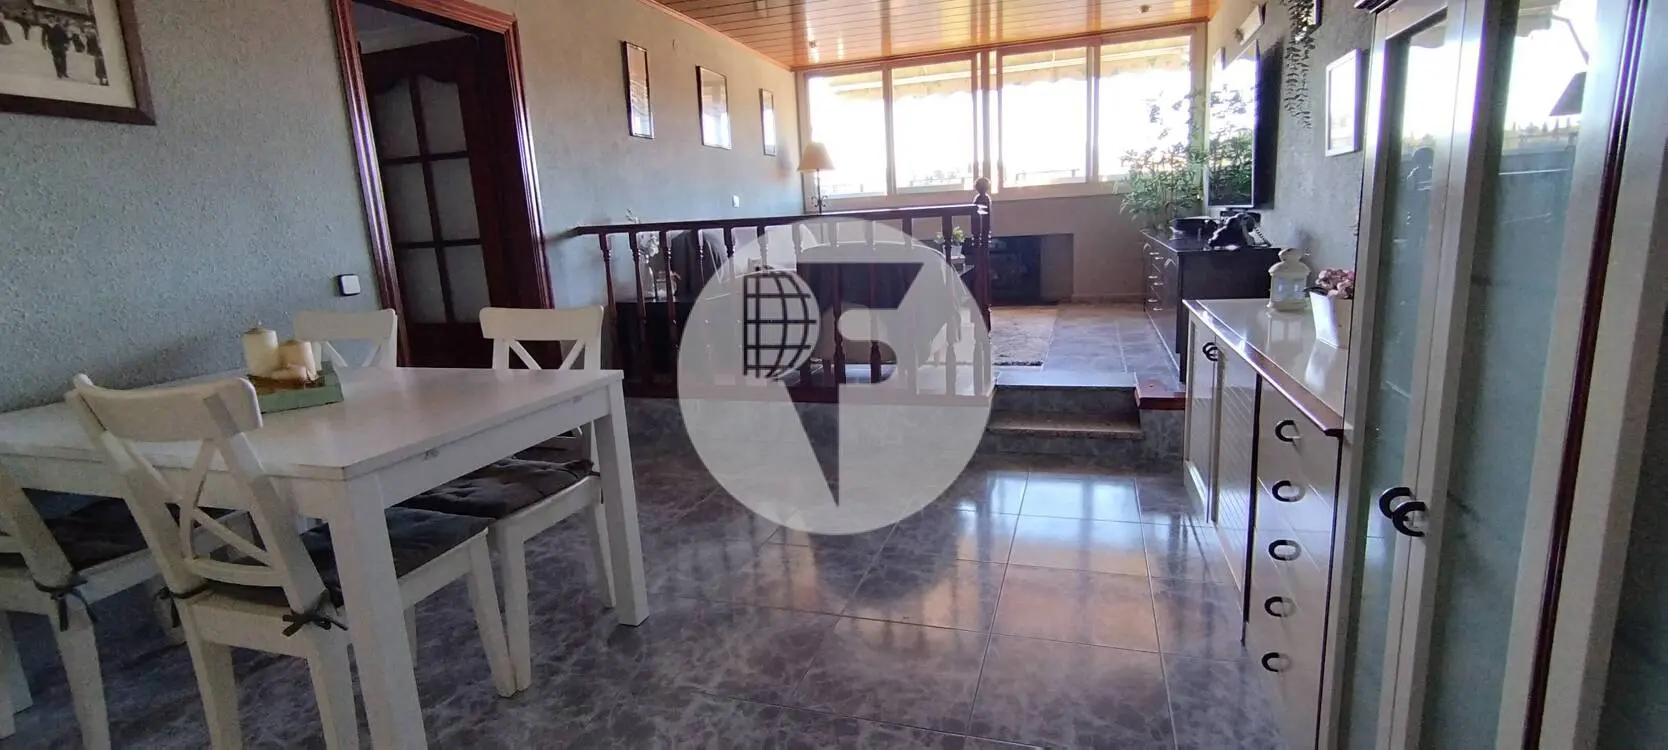 Charming 107m² flat with views and parking in Santa Eulalia de Ronçana 4